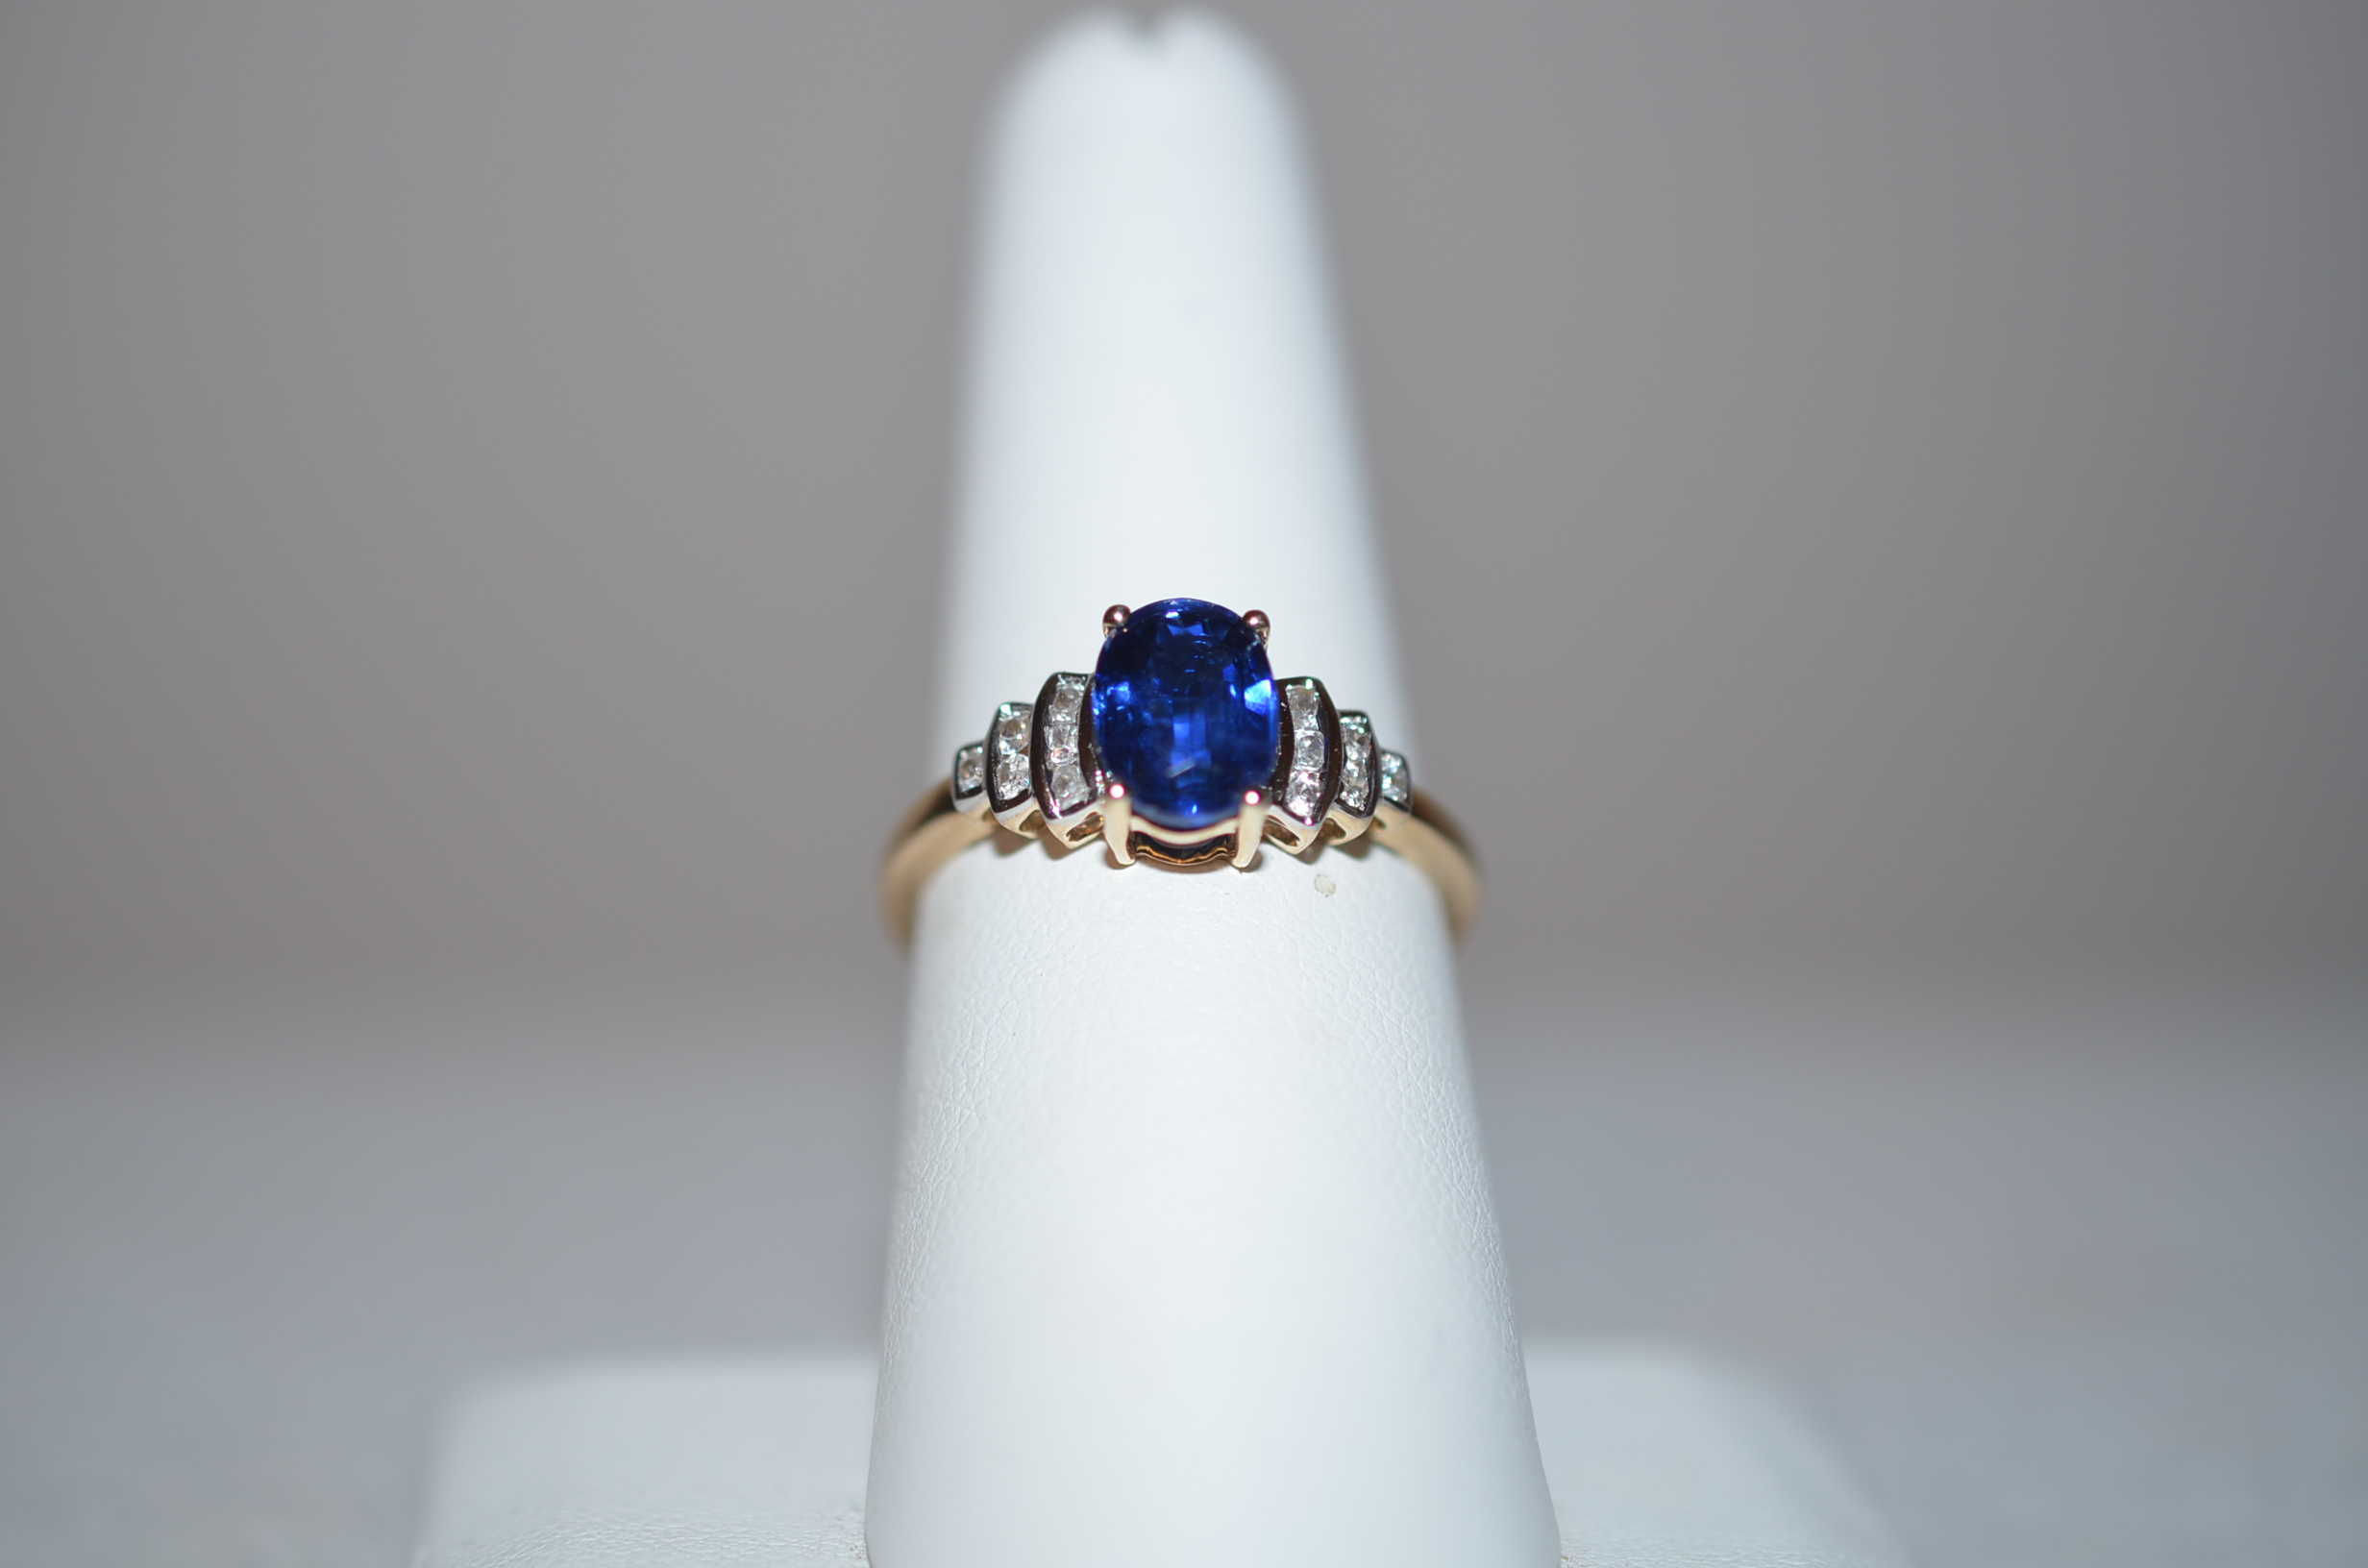 Faceted Kyanite Ring | A Journey Through Art